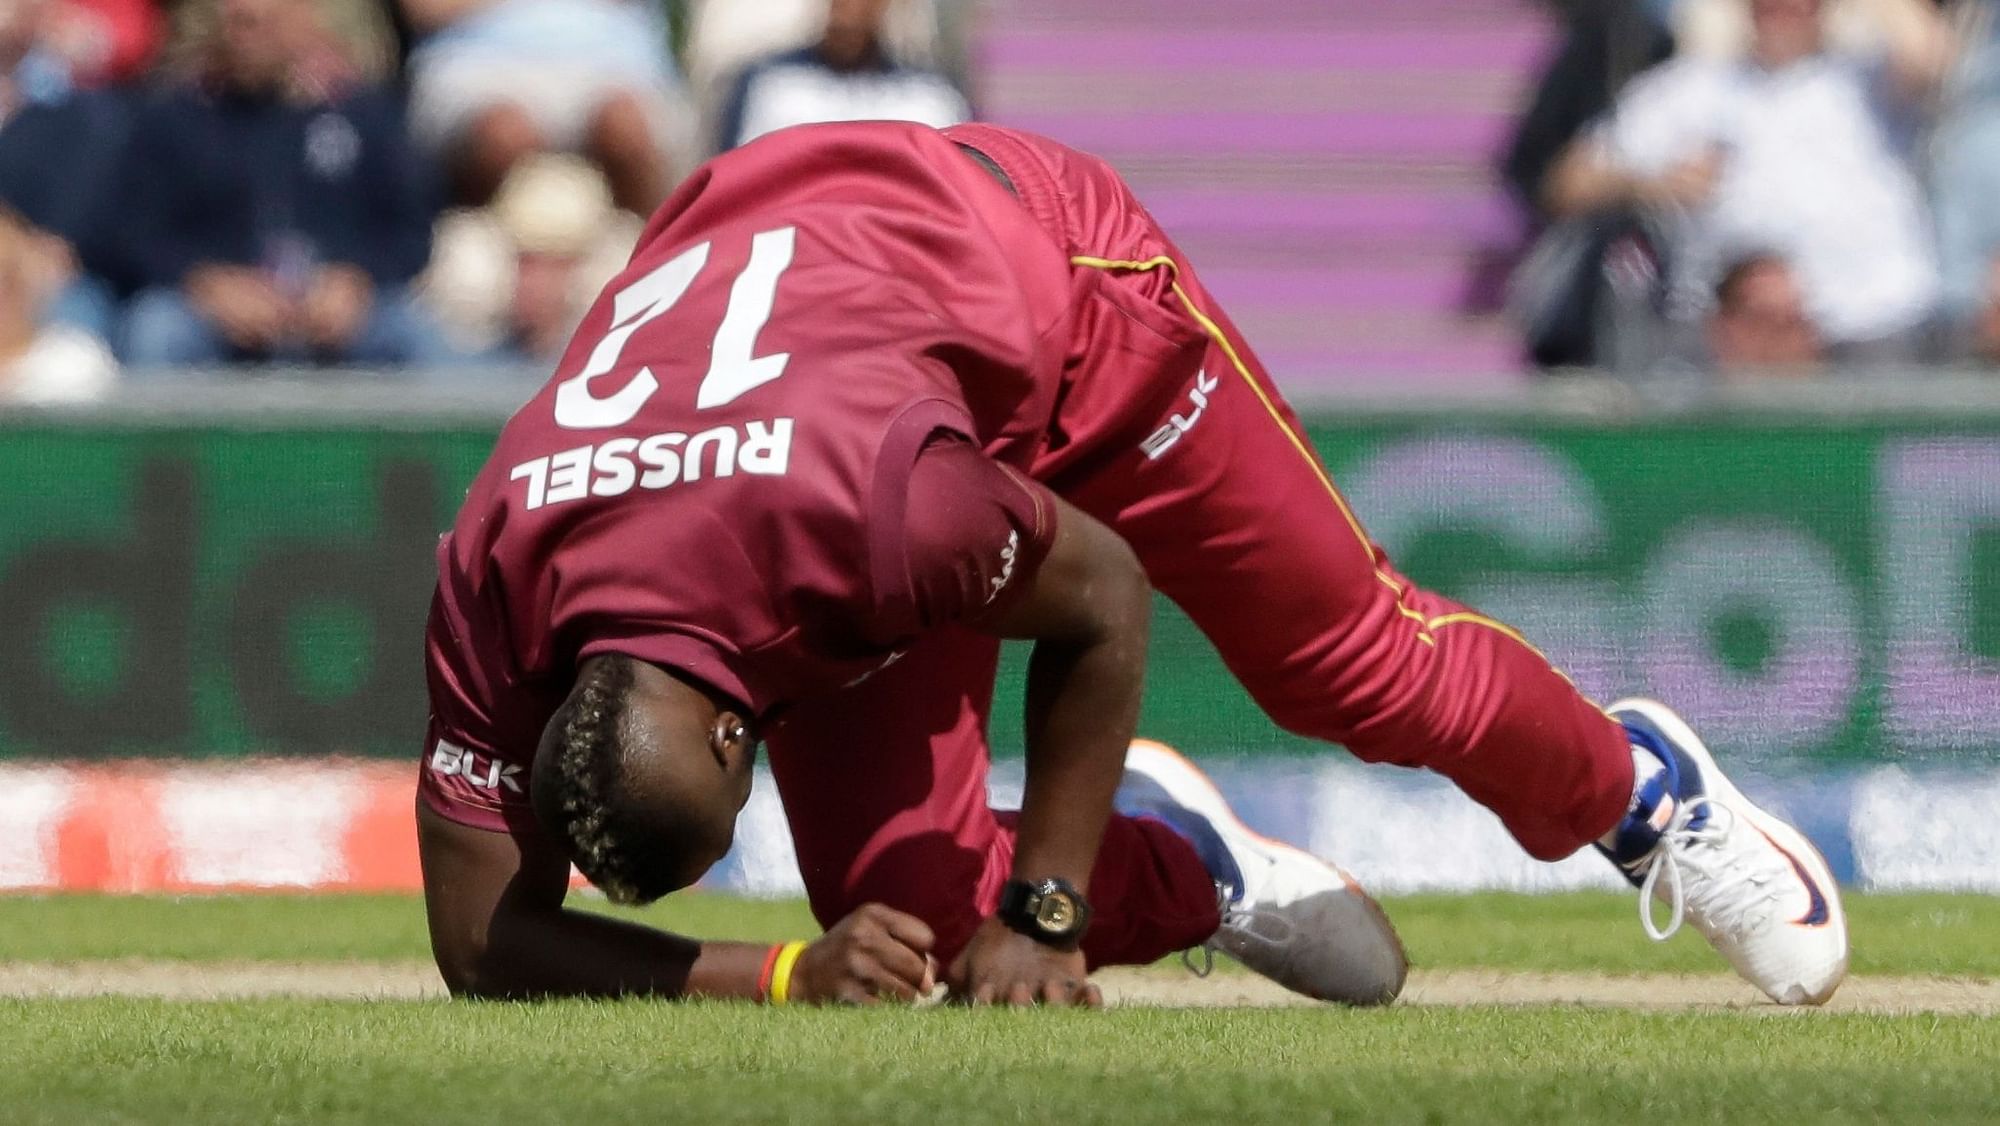 West Indies skipper Jason Holder said it has been a difficult week for the explosive all-rounder Andre Russell.